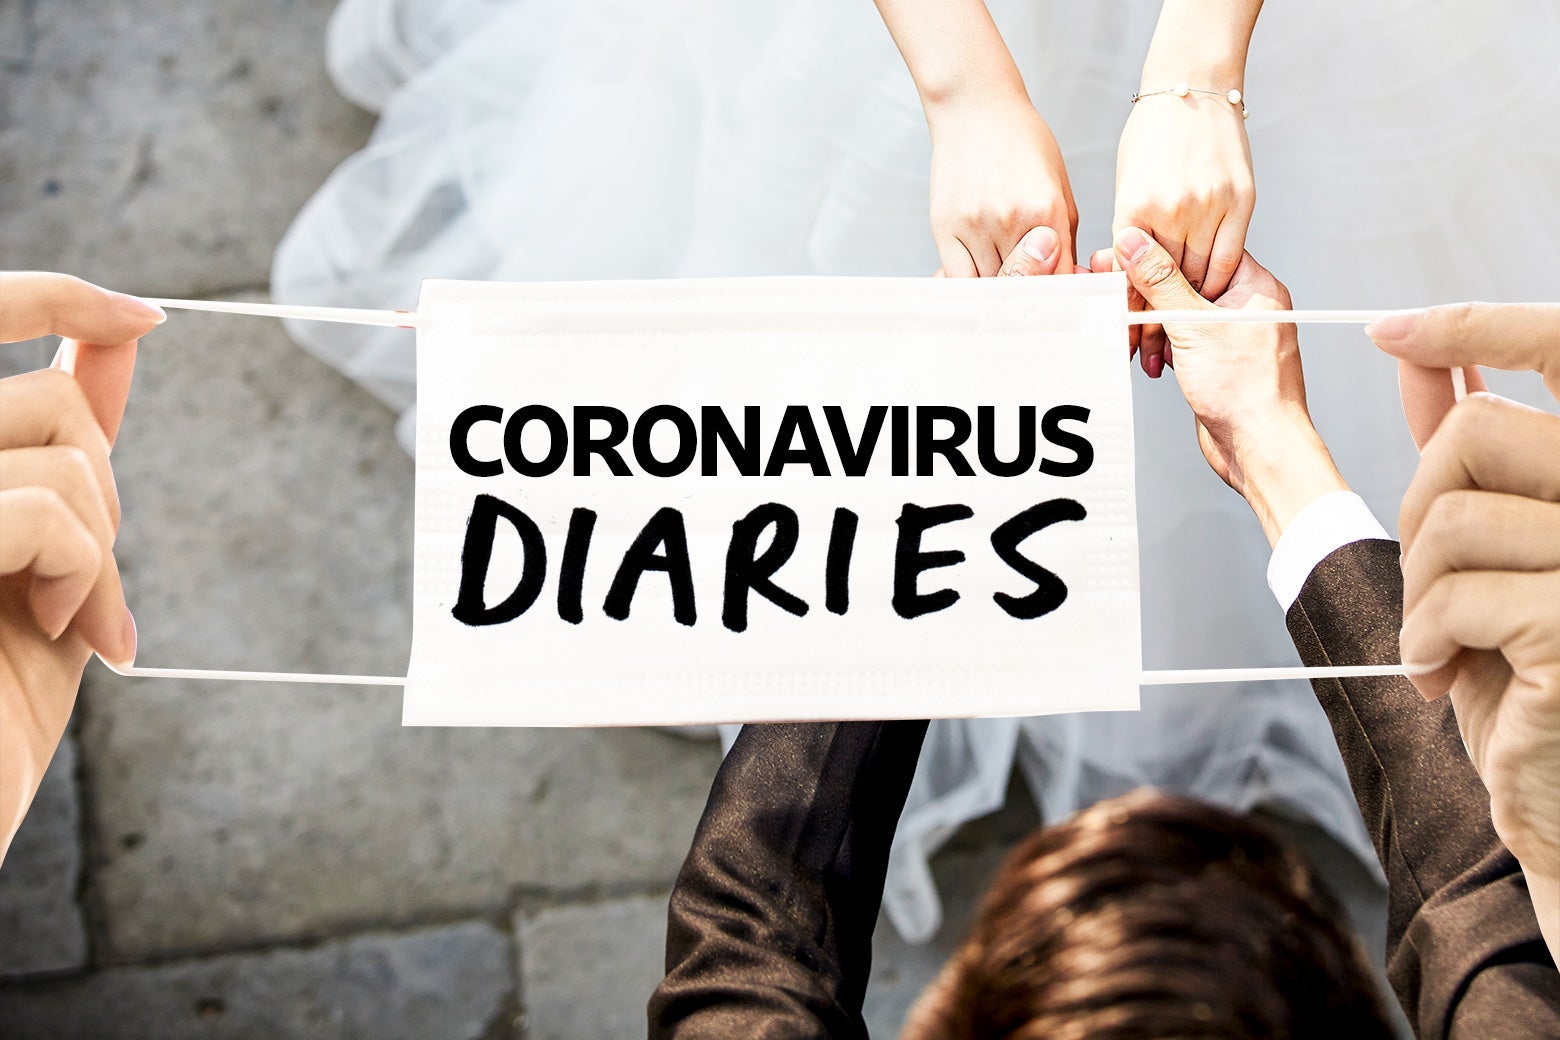 A view from above of two newlyweds holding hands, with a mask with the words "Coronavirus Diaries" draped over the setting